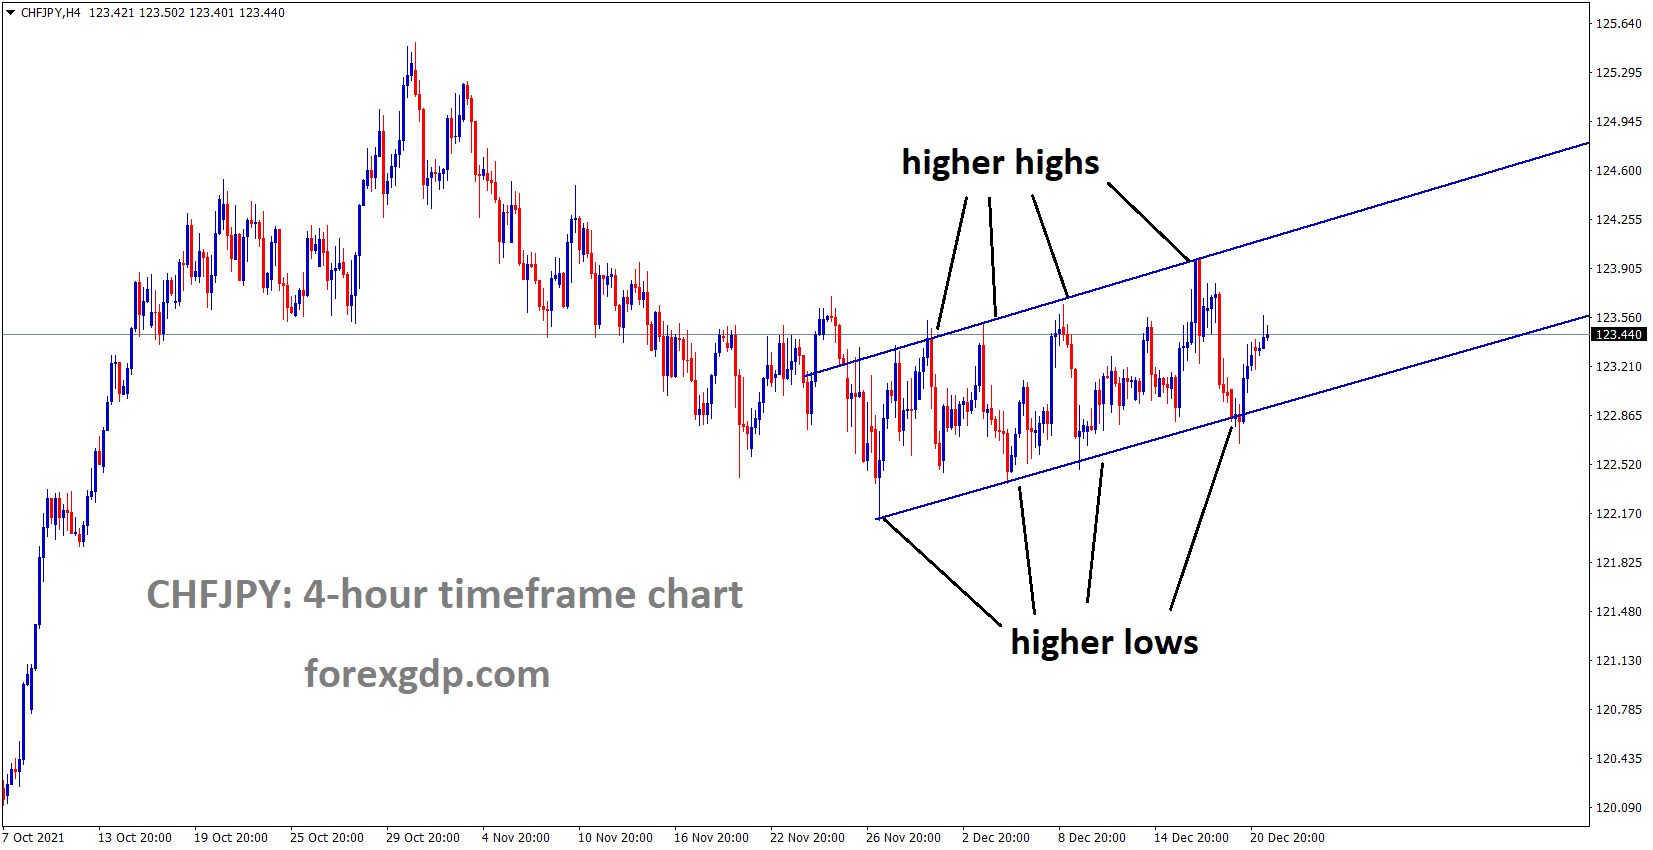 CHFJPY is moving in an ascending channel and the market has rebounded from the higher low area of the channel.